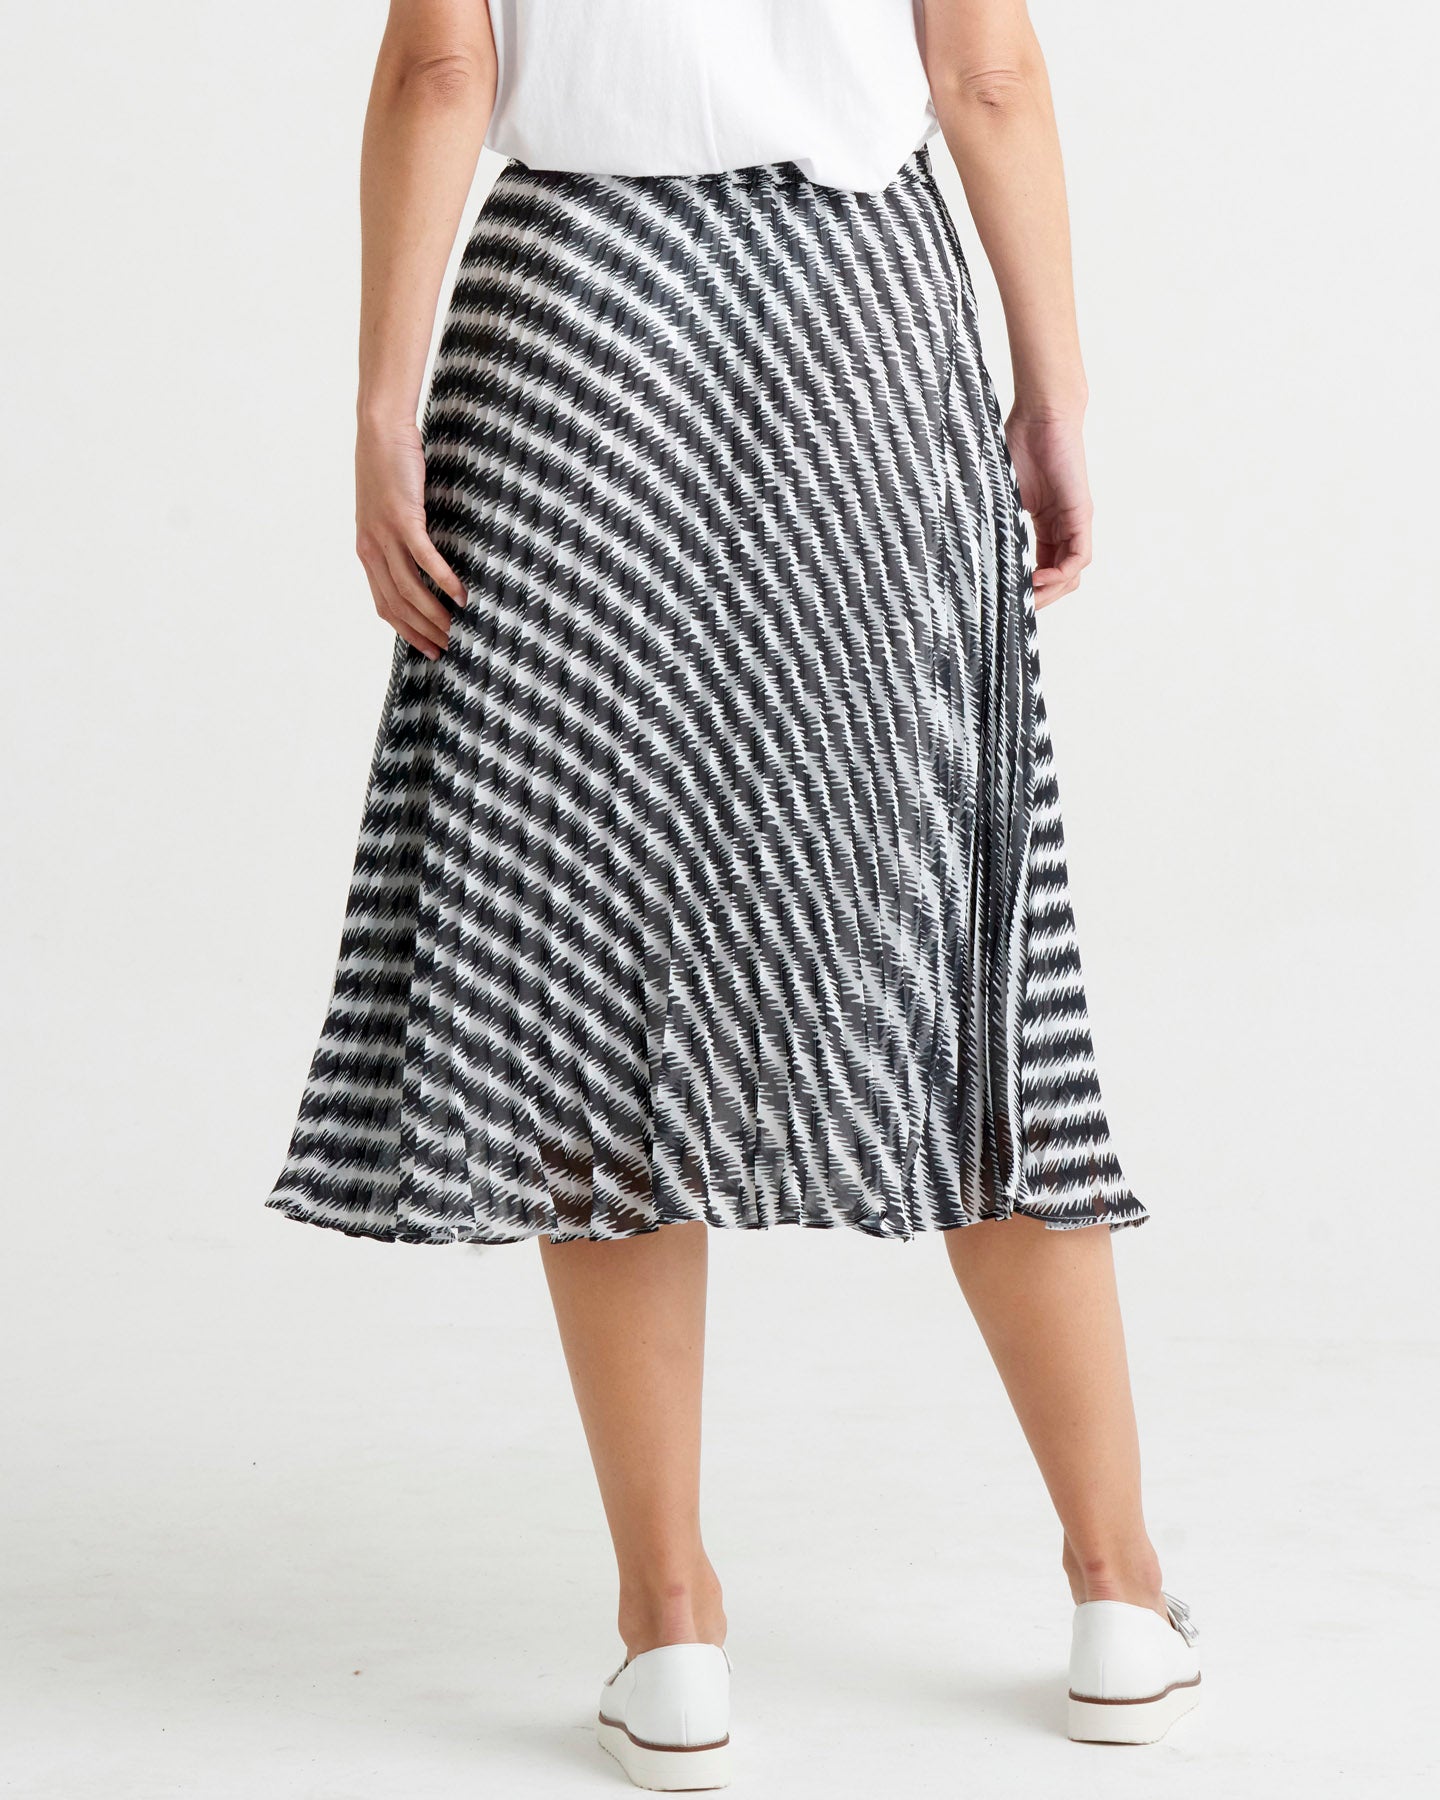 Chanel Pleated Skirt - Black Abstract